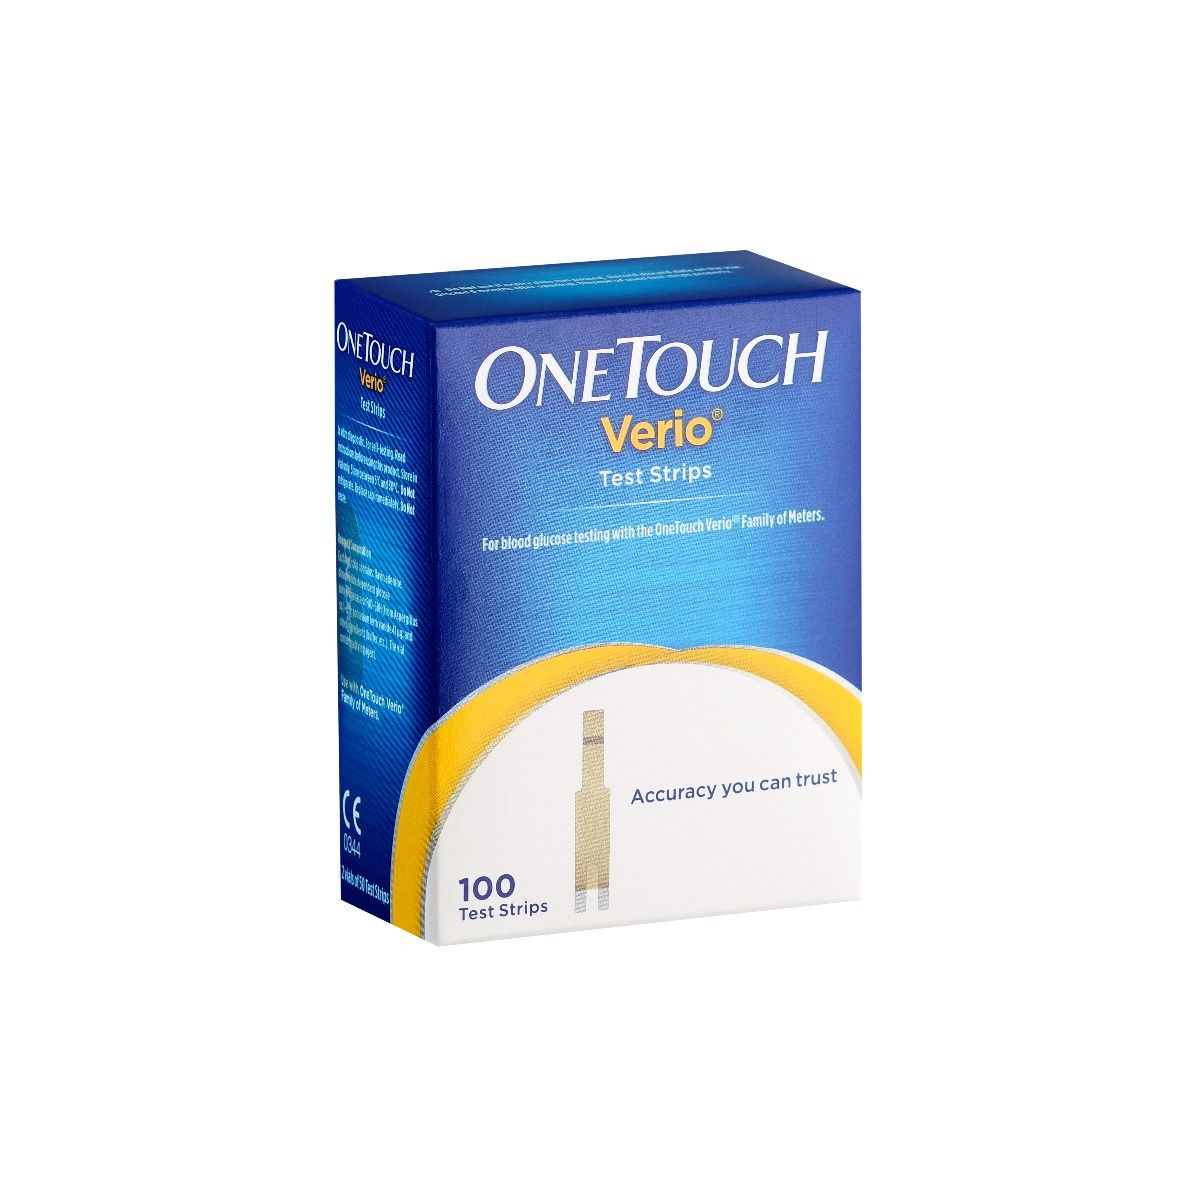 OneTouch Verio Test Strips, 100 Count, Pack of 1 